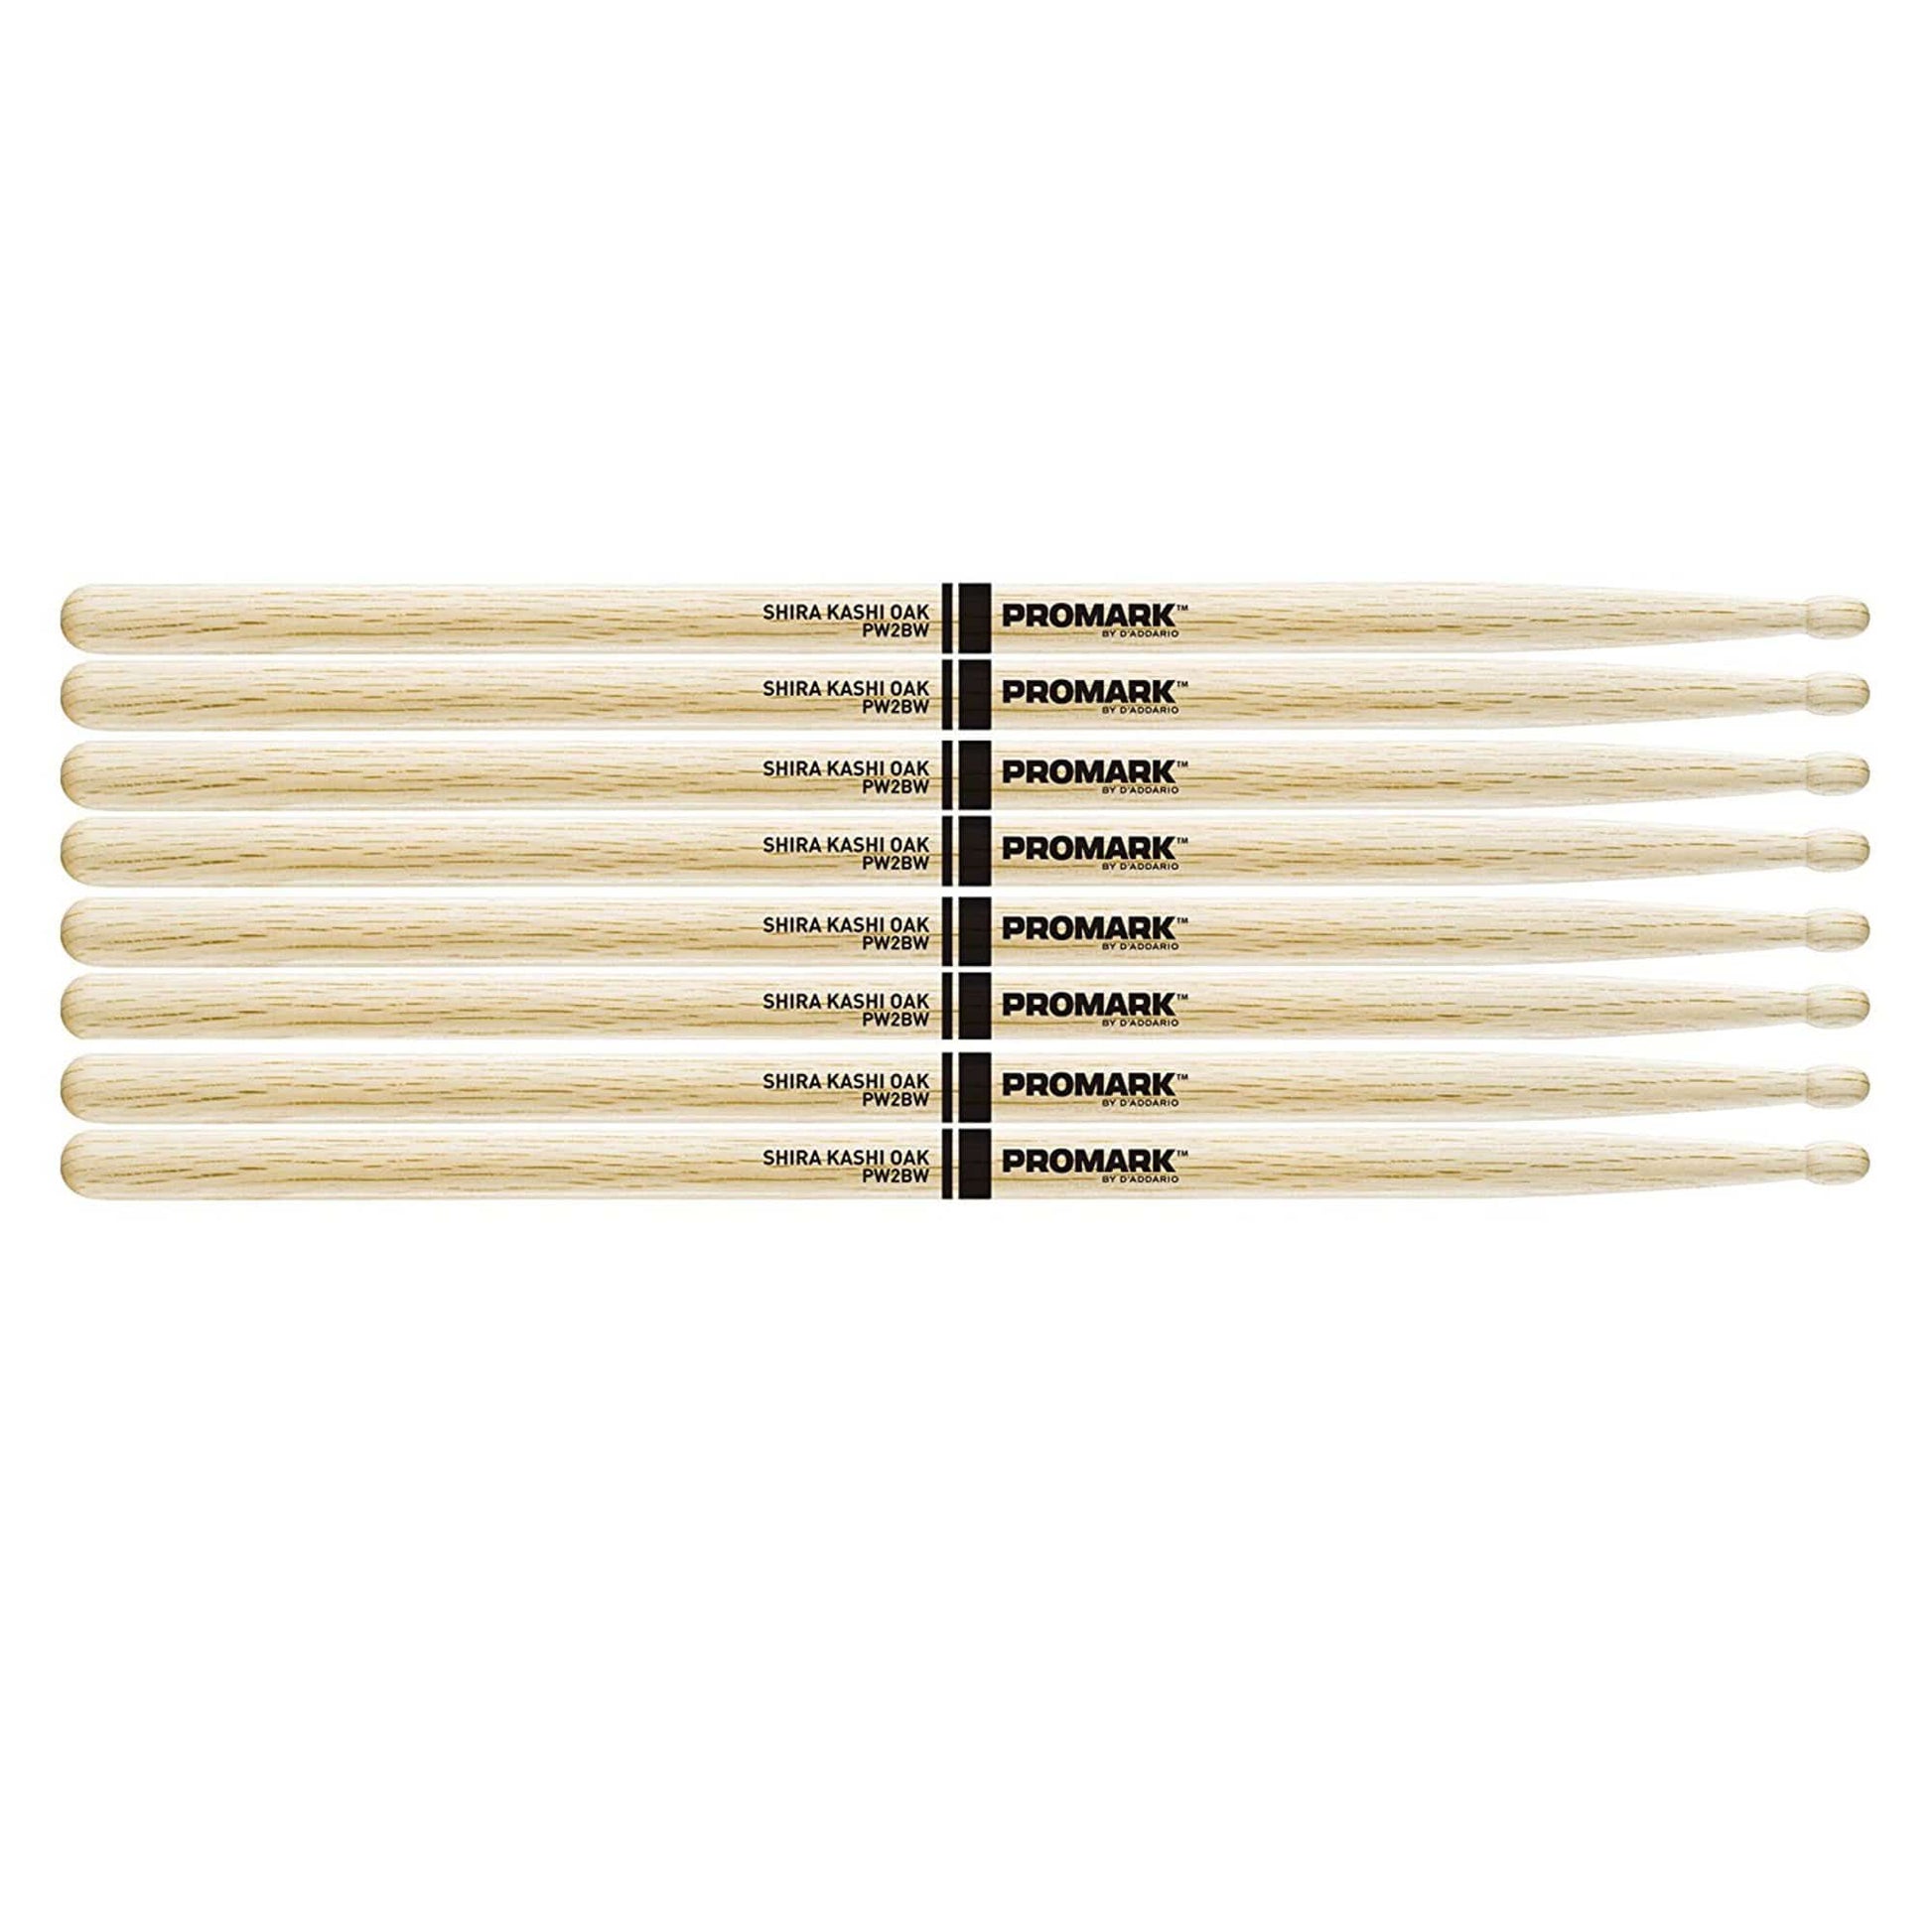 Promark Shira Kashi Oak 2B Wood Tip Drum Sticks (4 Pair) Drums and Percussion / Parts and Accessories / Drum Sticks and Mallets